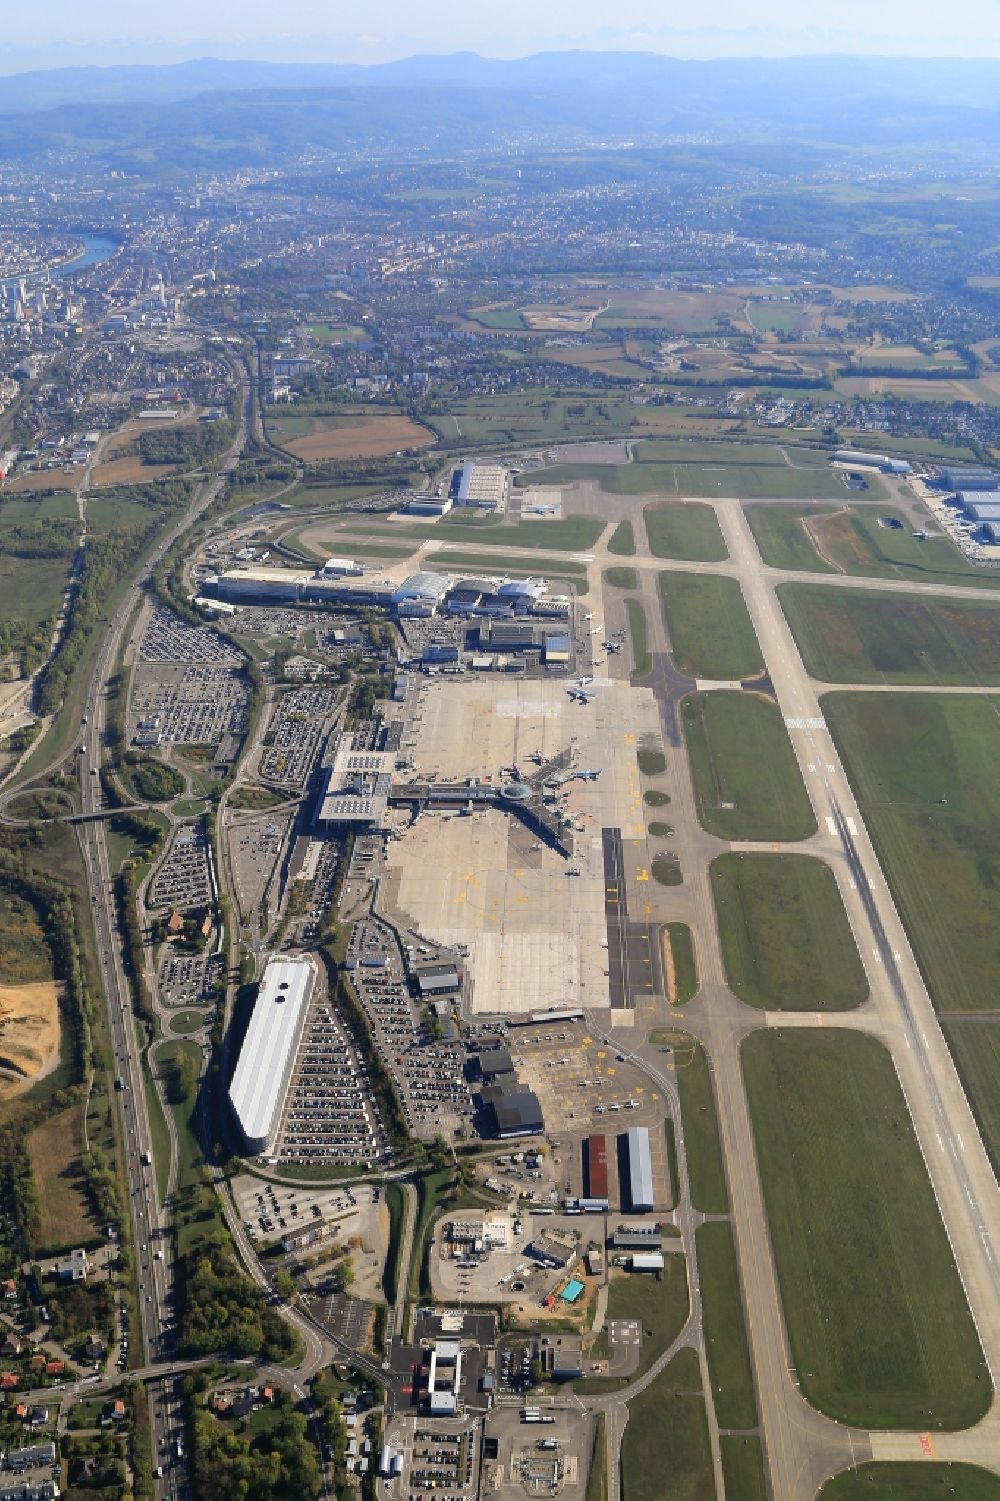 Aerial photograph Saint-Louis - Car parking, terminal area and tarmac on the grounds of the airport Euroairport in Saint-Louis in Alsace-Champagne-Ardenne-Lorraine, France